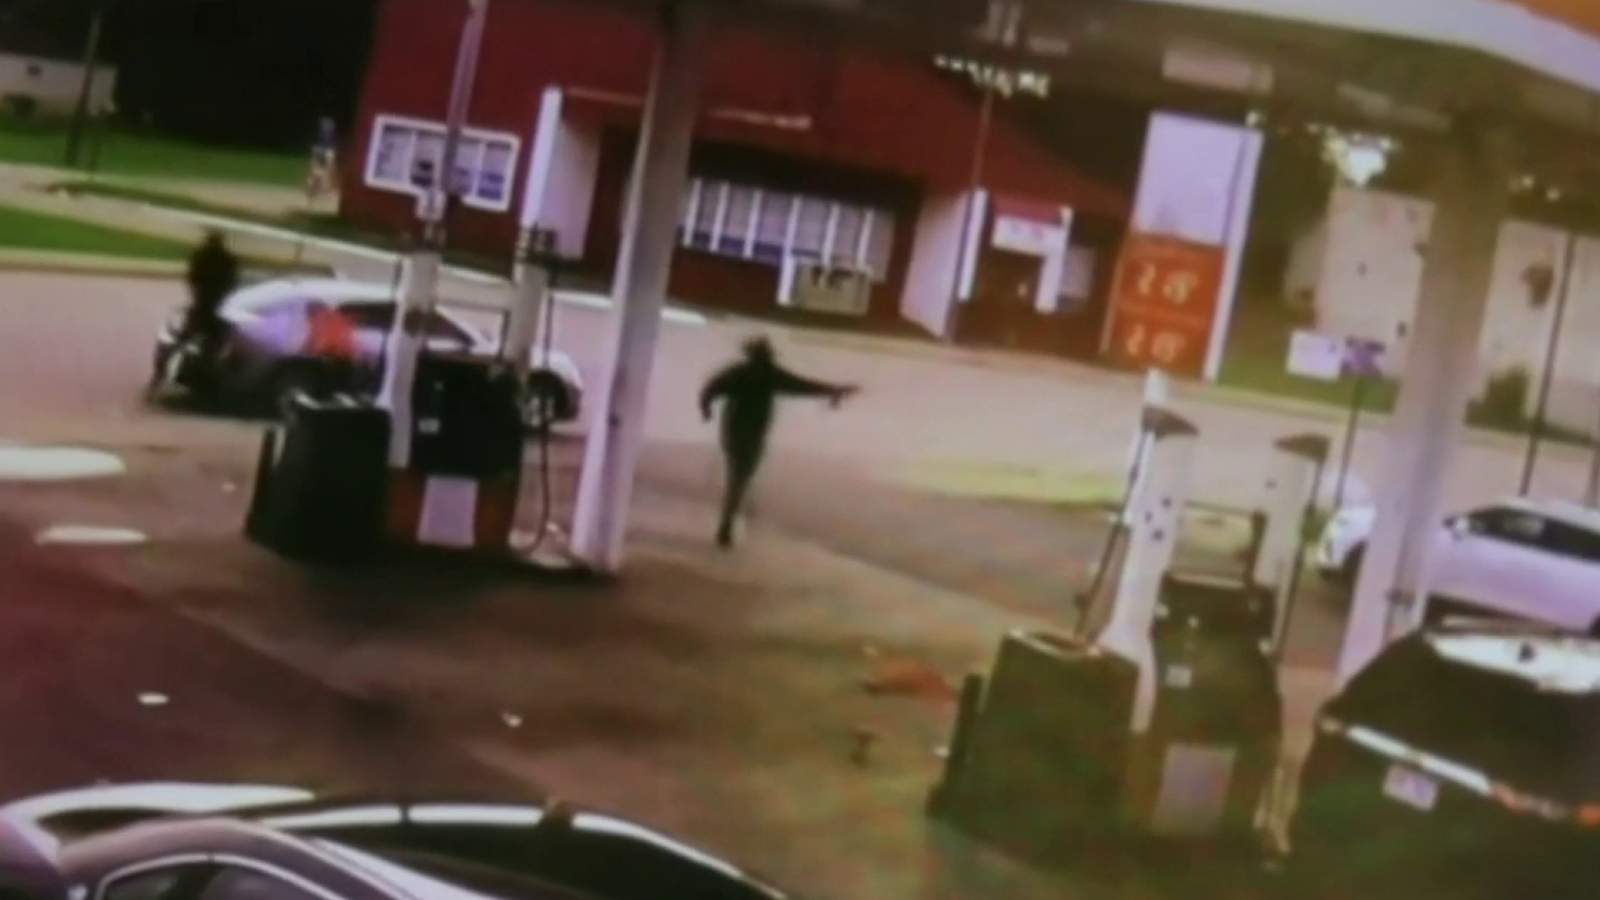 Security camera captures video of deadly shooting at River Rouge gas station